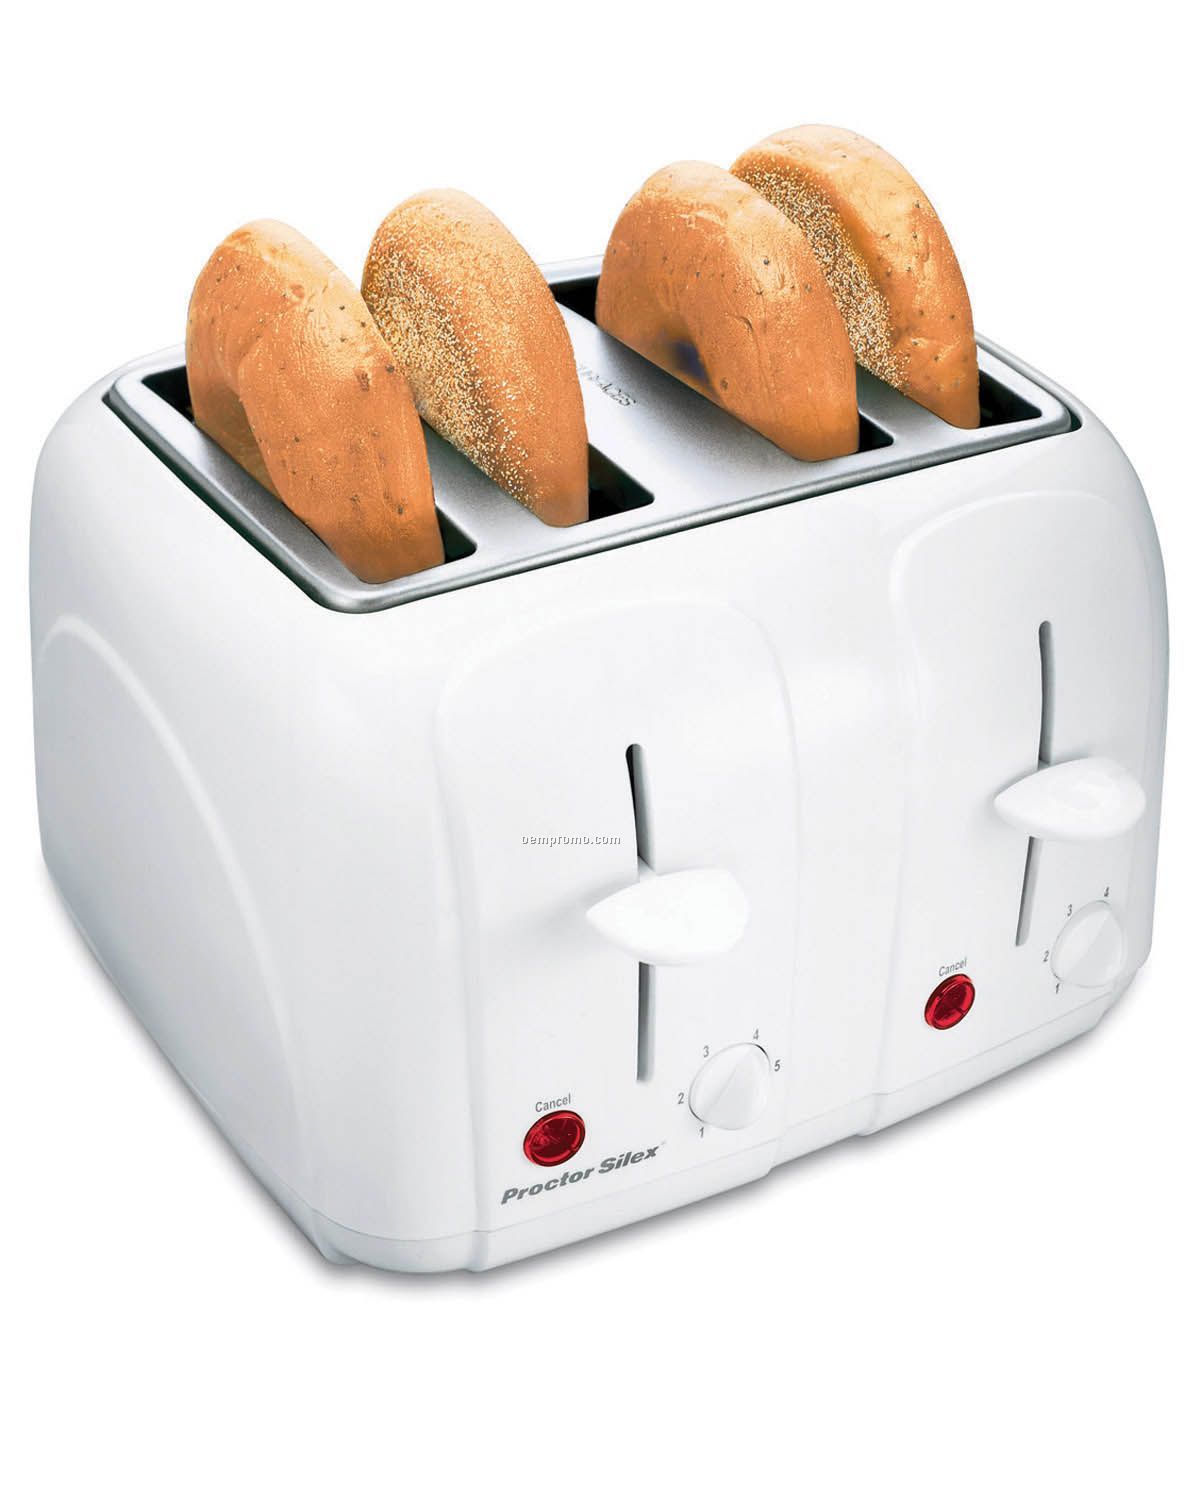 Proctor Silex 4-slice Cool-touch Toaster